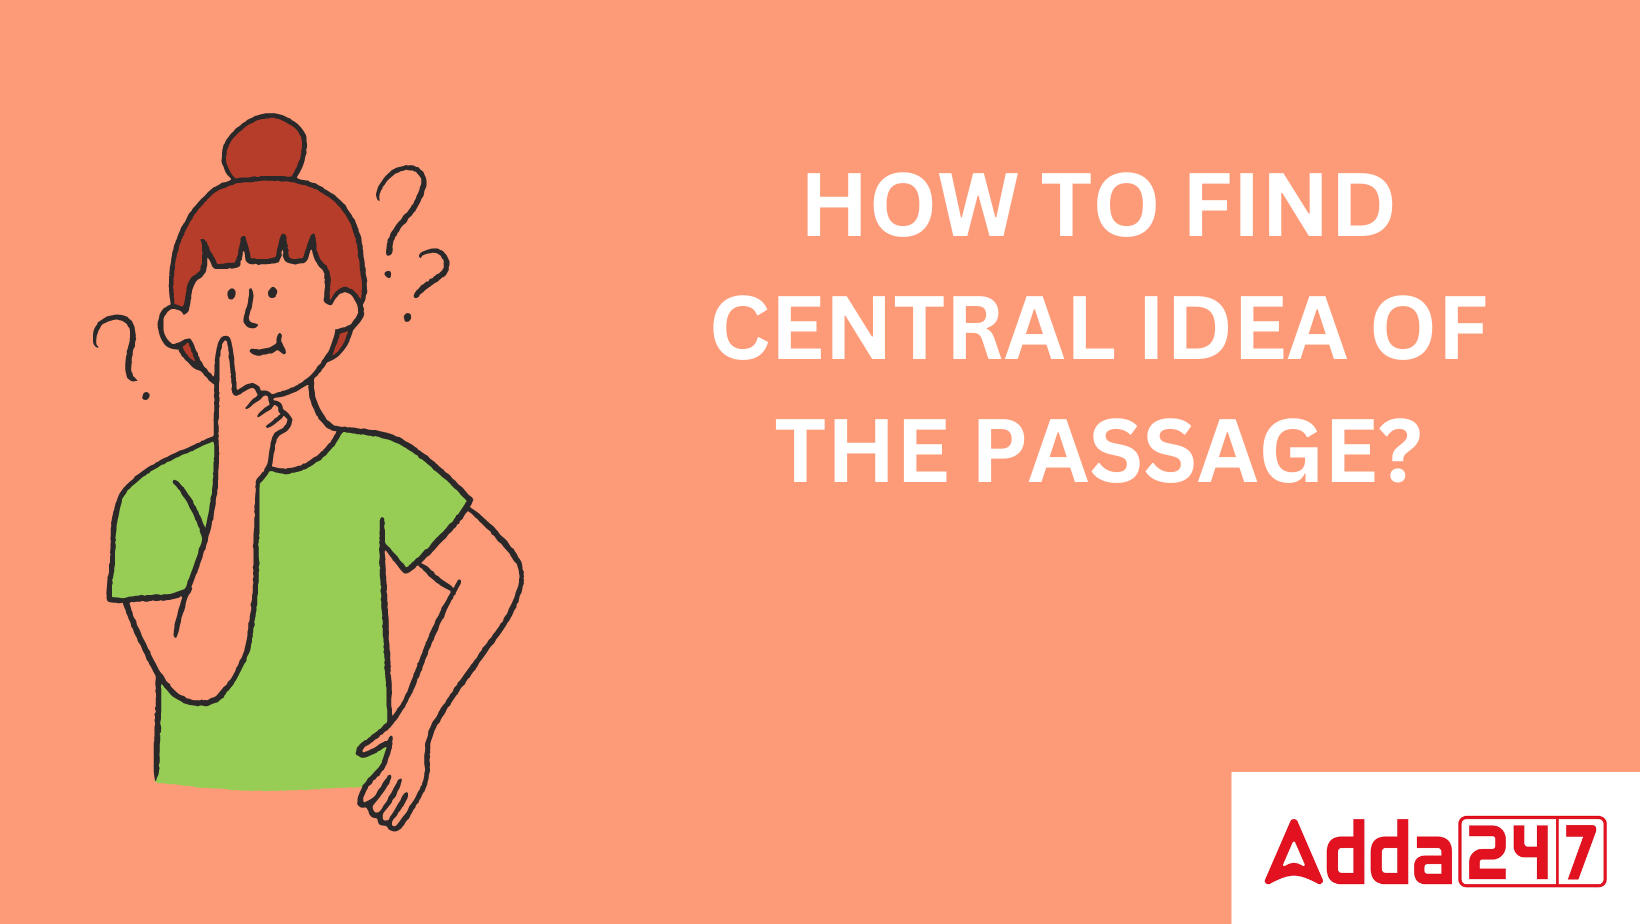 HOW TO FIND CENTRAL IDEA OF THE PASSAGE